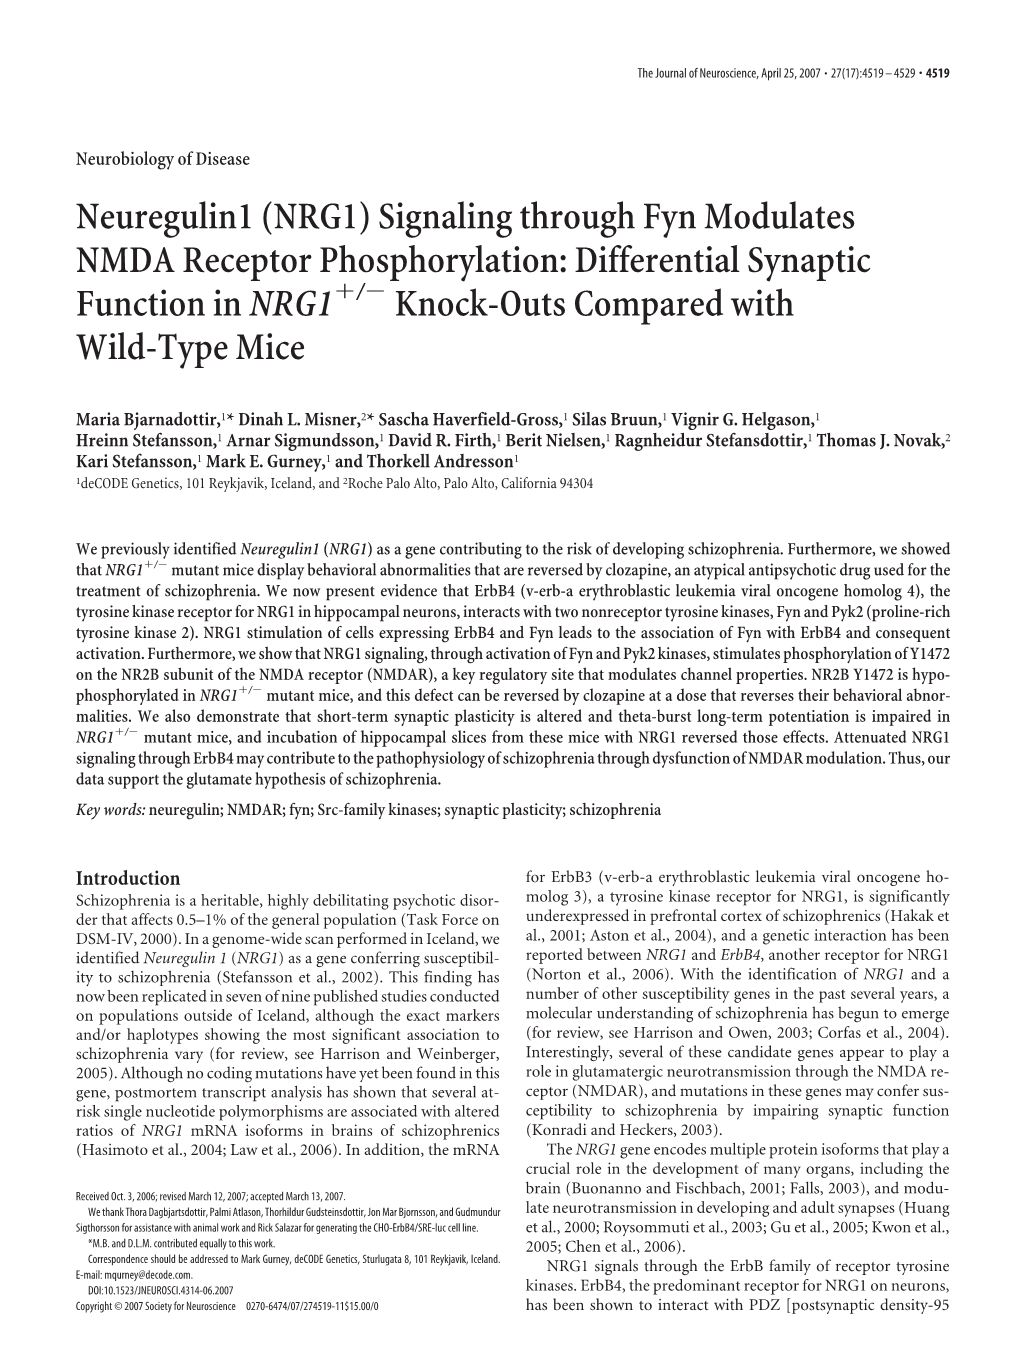 (NRG1) Signaling Through Fyn Modulates NMDA Receptor Phosphorylation: Differential Synaptic Function in Nrg1ϩ/Ϫ Knock-Outs Compared with Wild-Type Mice